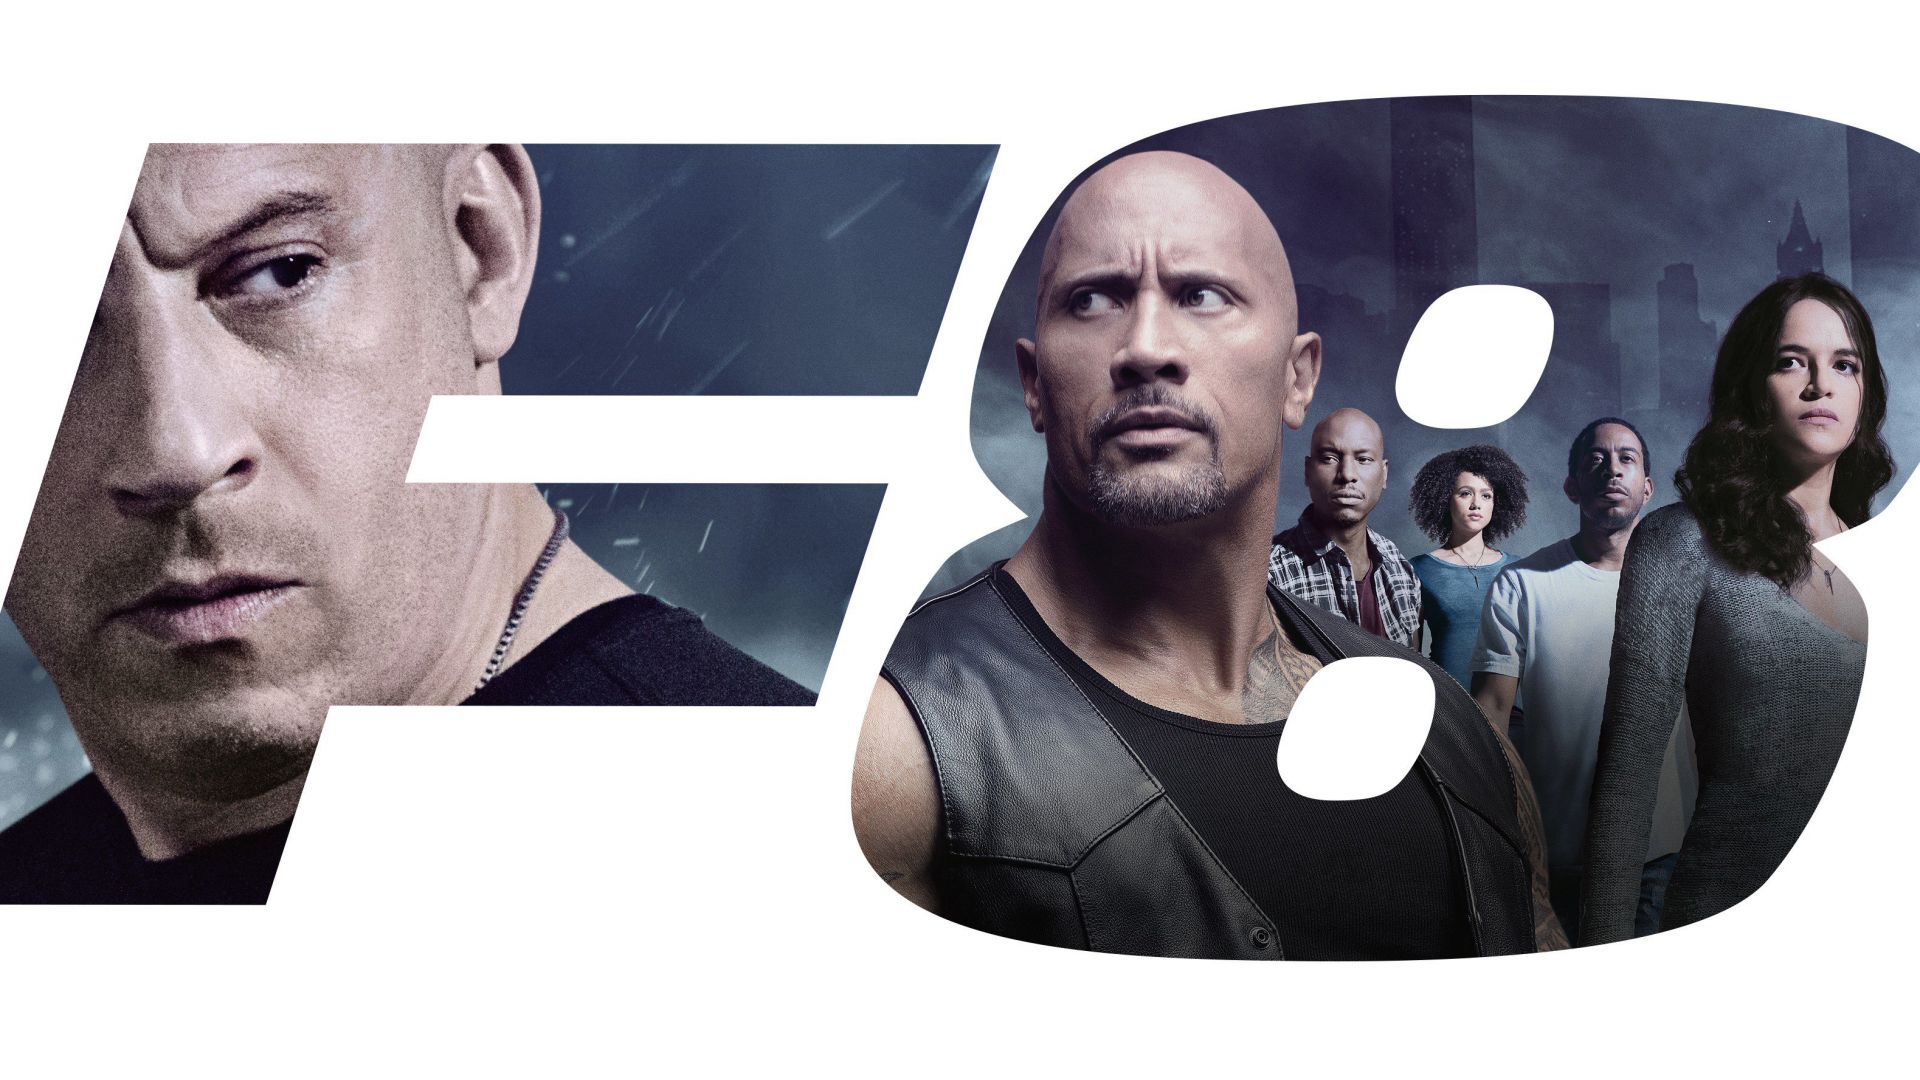 Wallpaper The Fate of the Furious, 2017 movie, Vin Diesel, Dwayne Johnson, casts